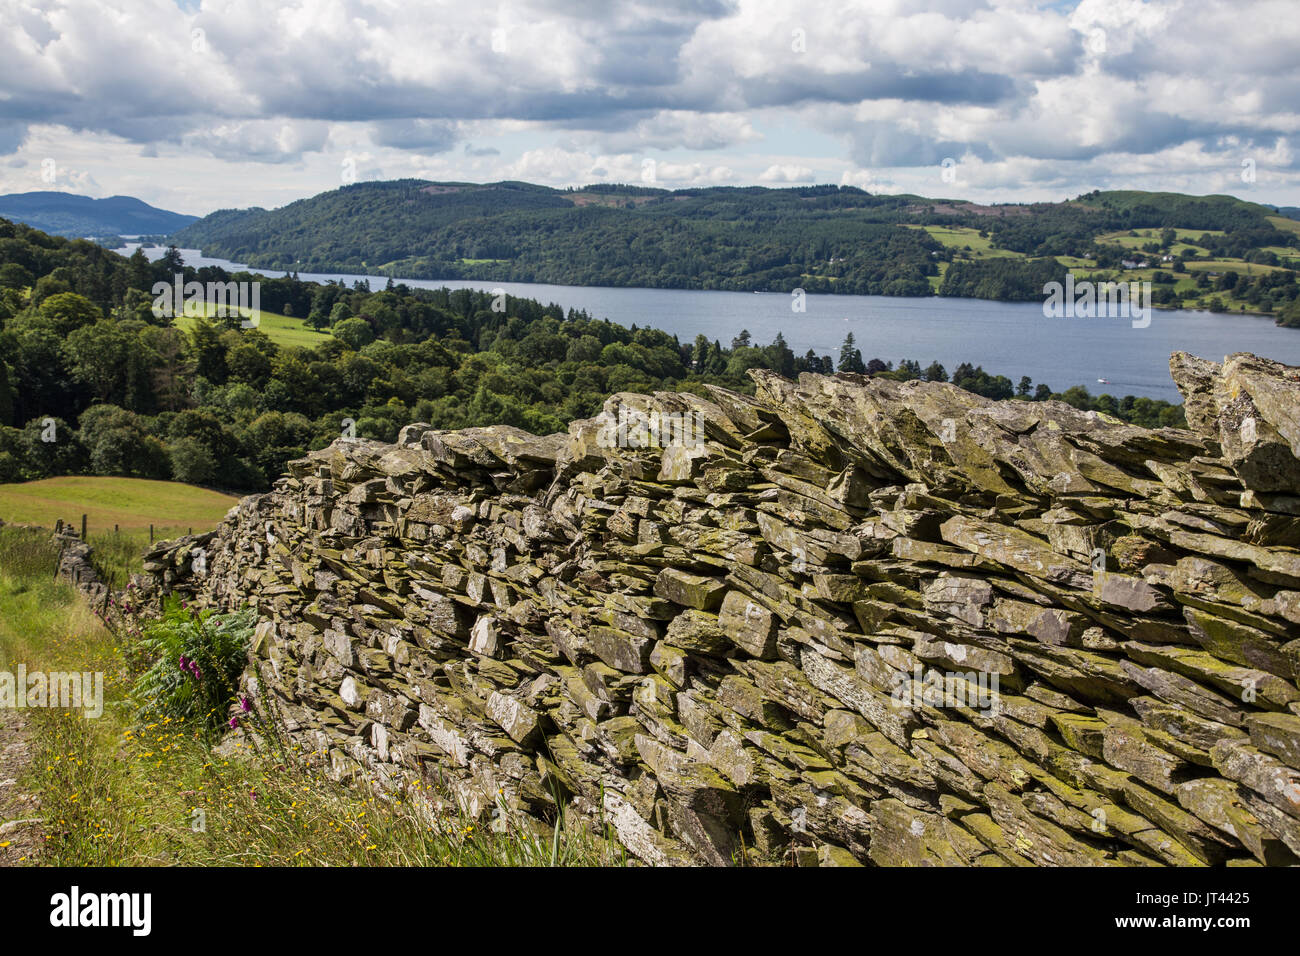 High Viewpoint Overlooking Lake Windermere. Stock Photo